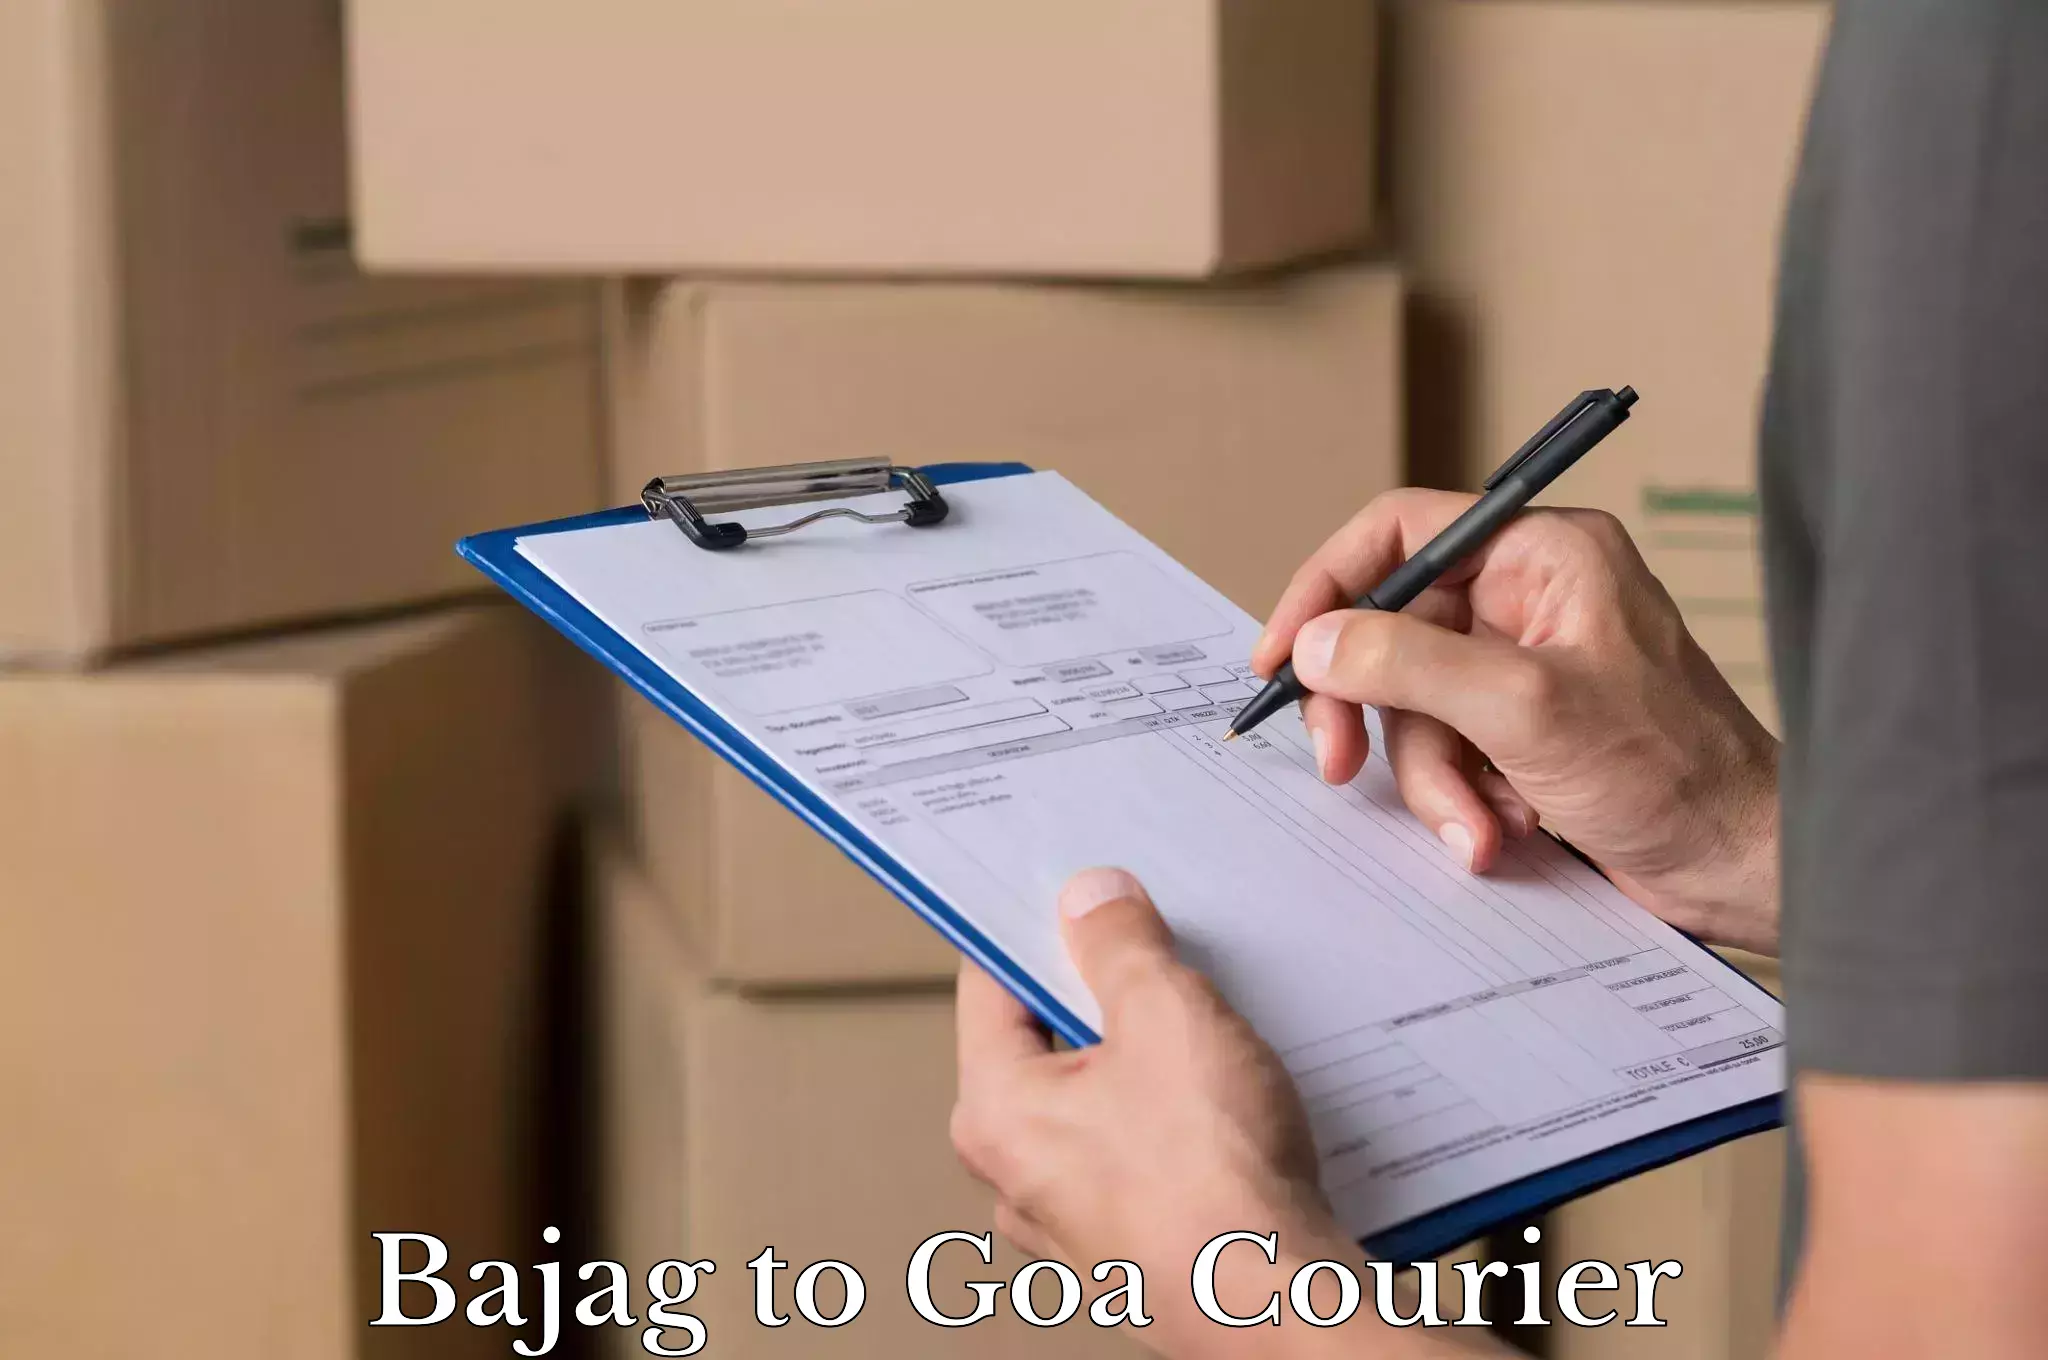 Luggage shipment specialists Bajag to Goa